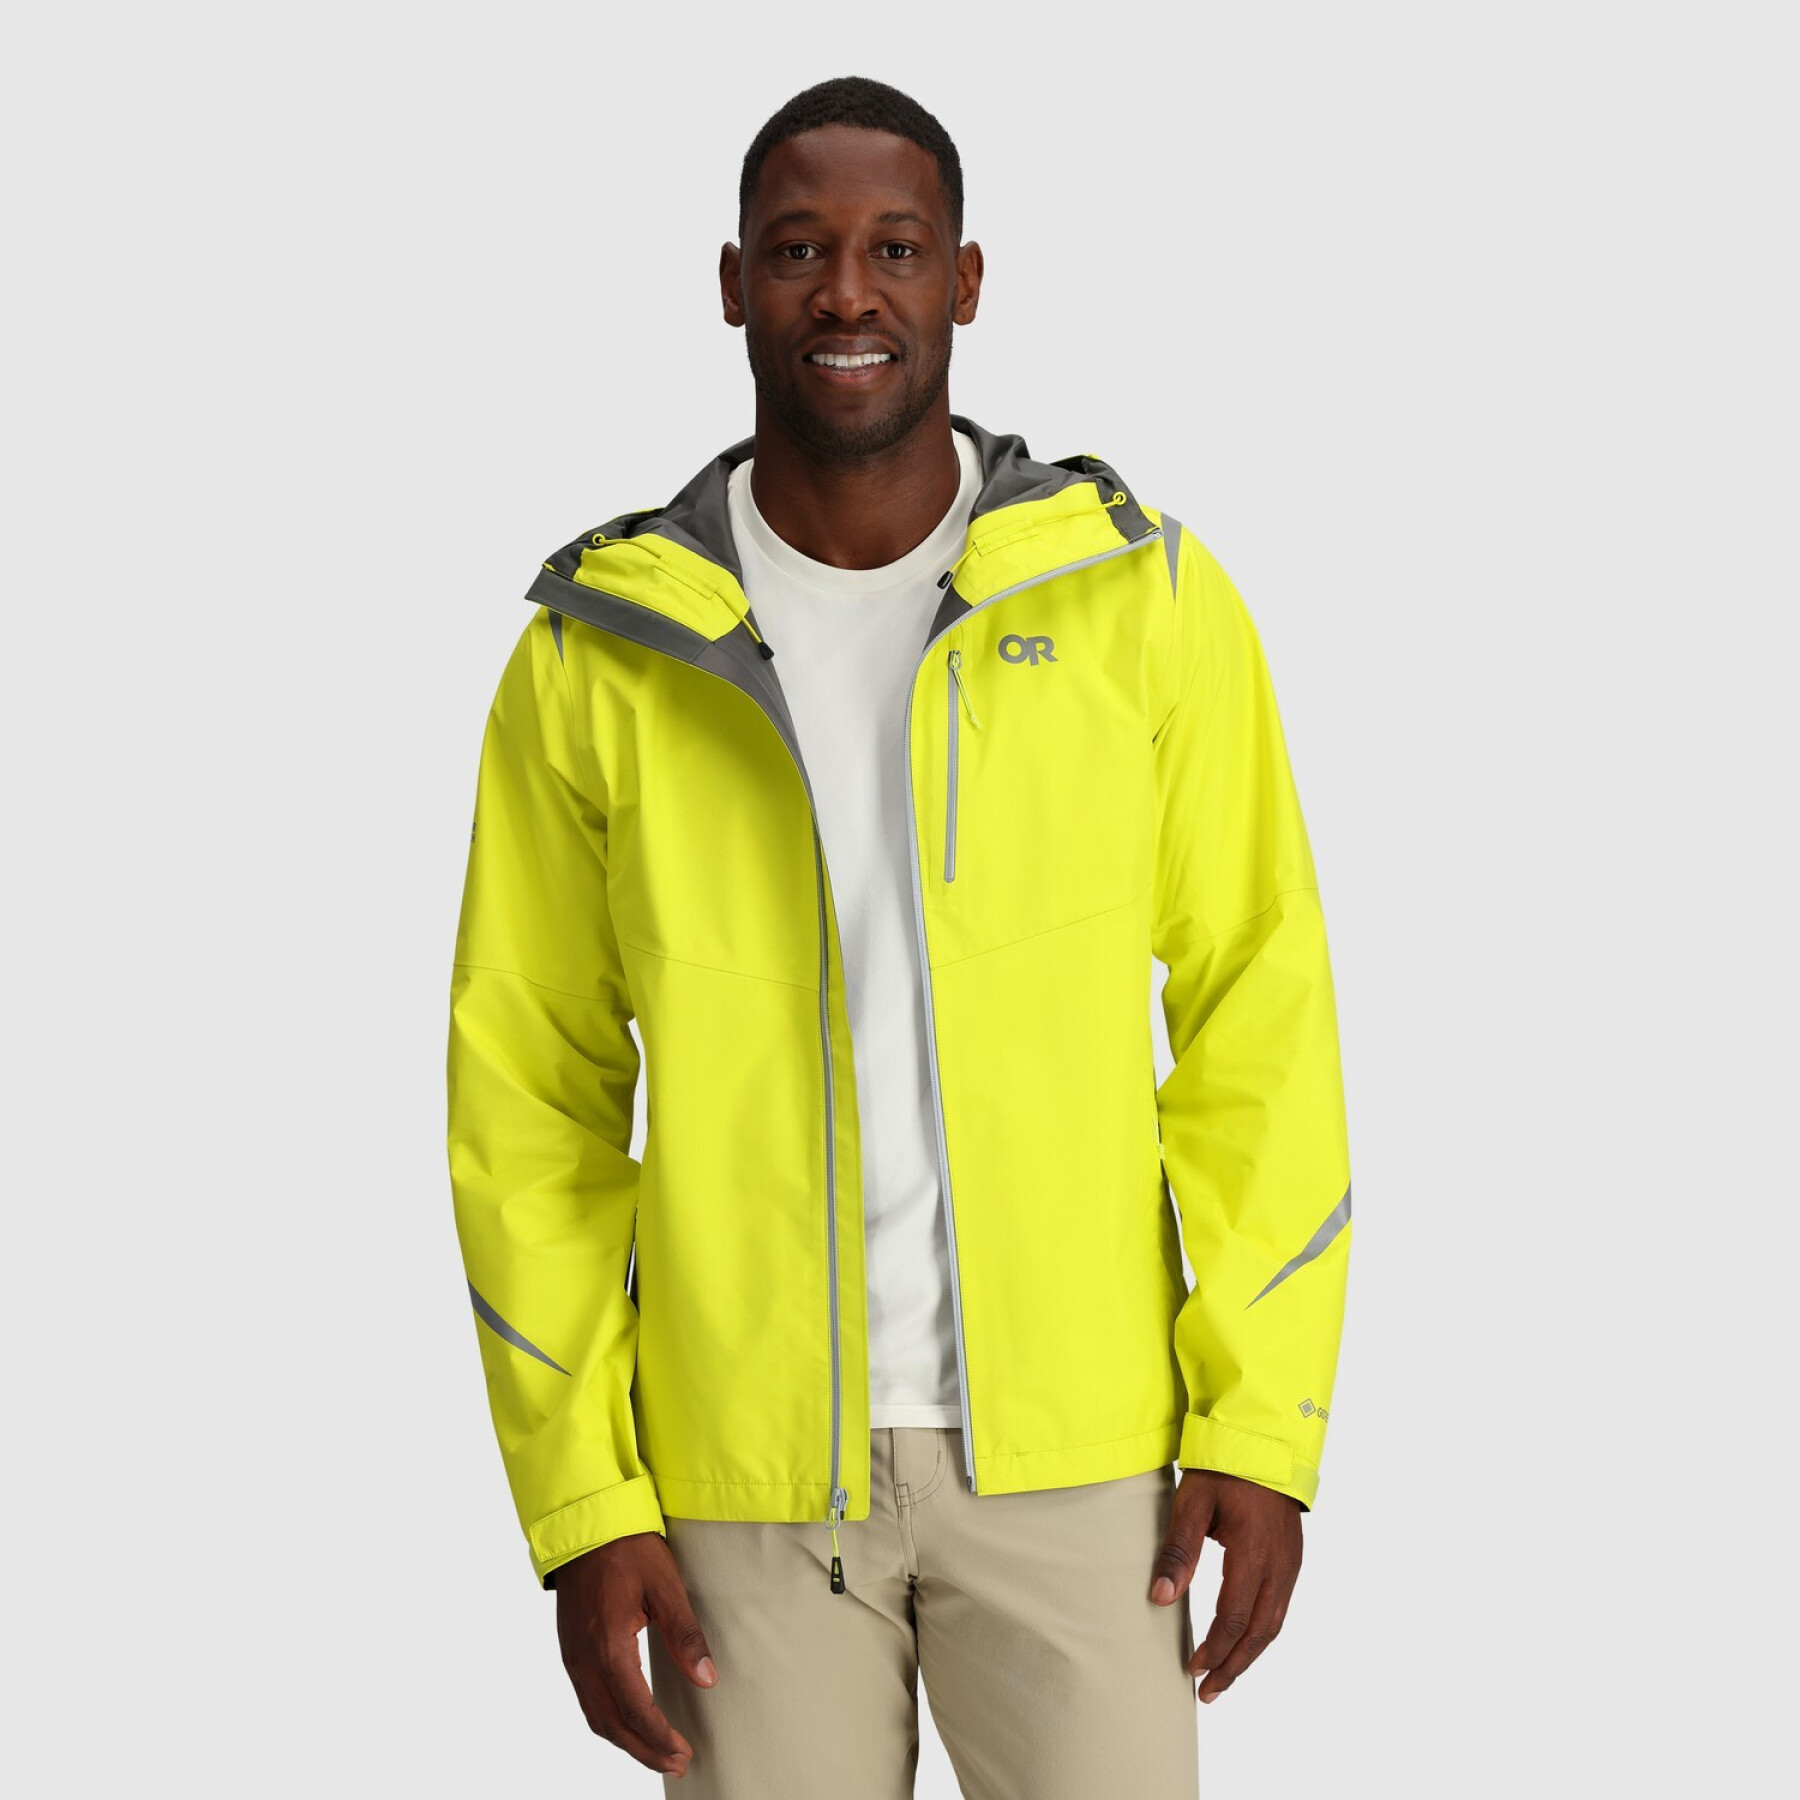 Chaqueta impermeable Outdoor Research Foray II